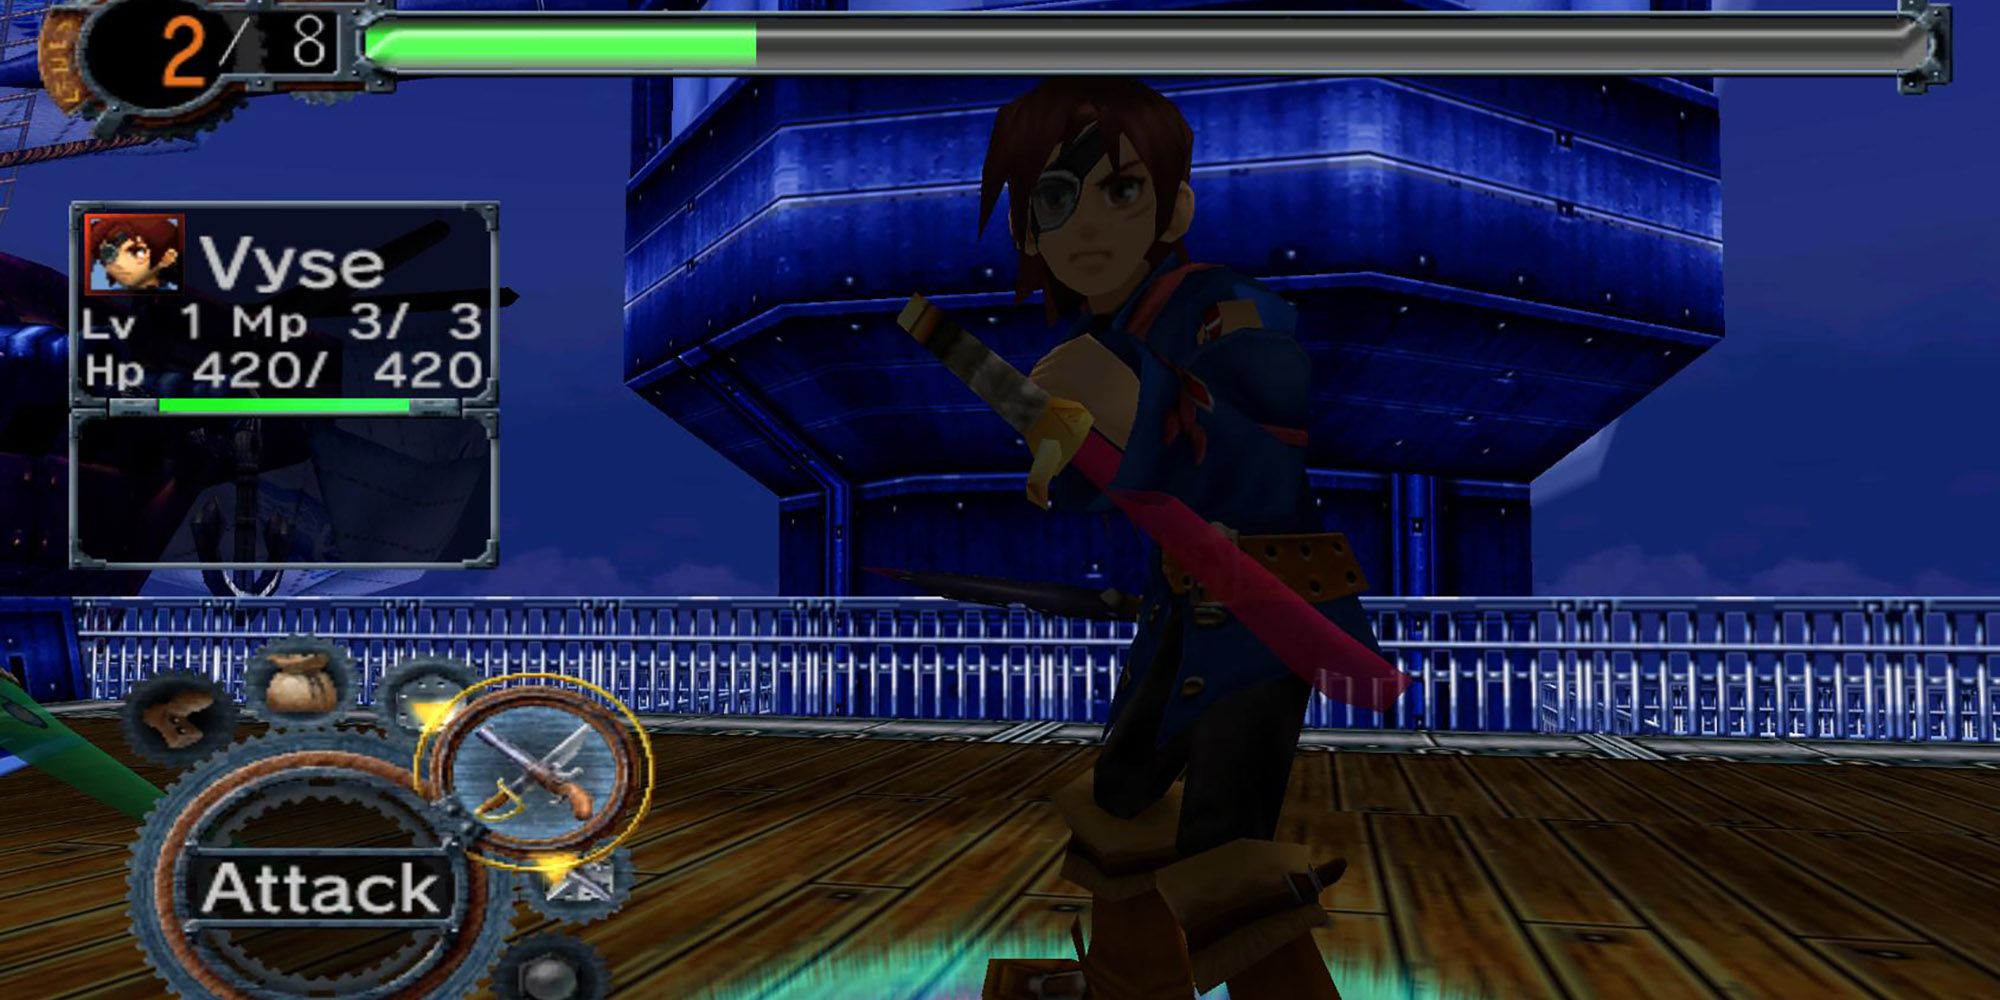 Vyse ready to fight in Skies of Arcadia